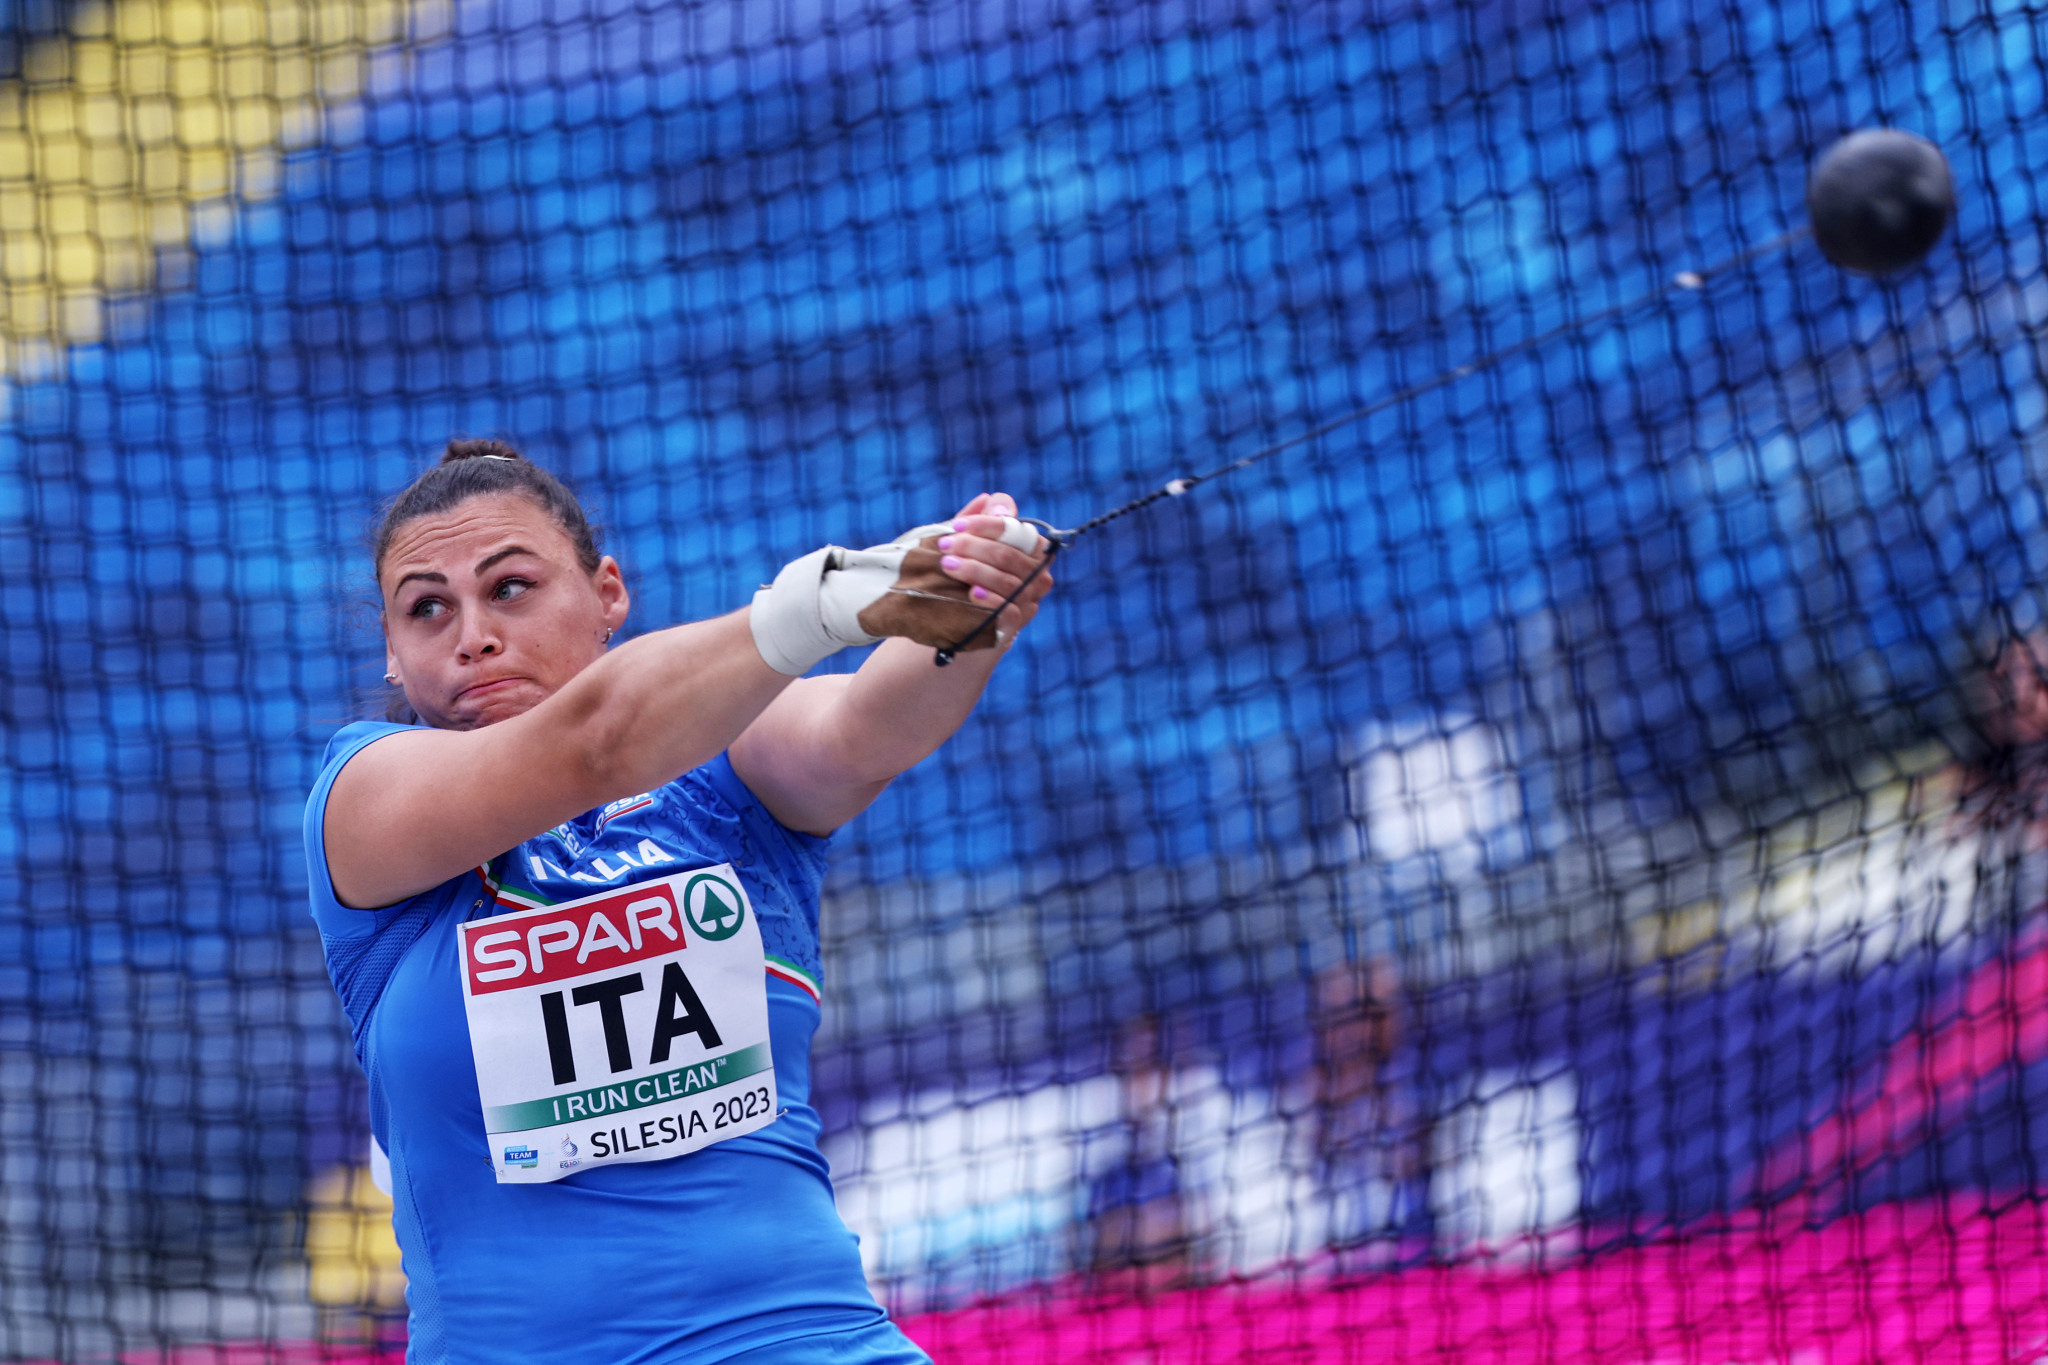 Sara Fantini in the women's hammer throw won one of three athletics golds for Italy which put them top of the first division standings at the European Athletics Team Championships ©Getty Images